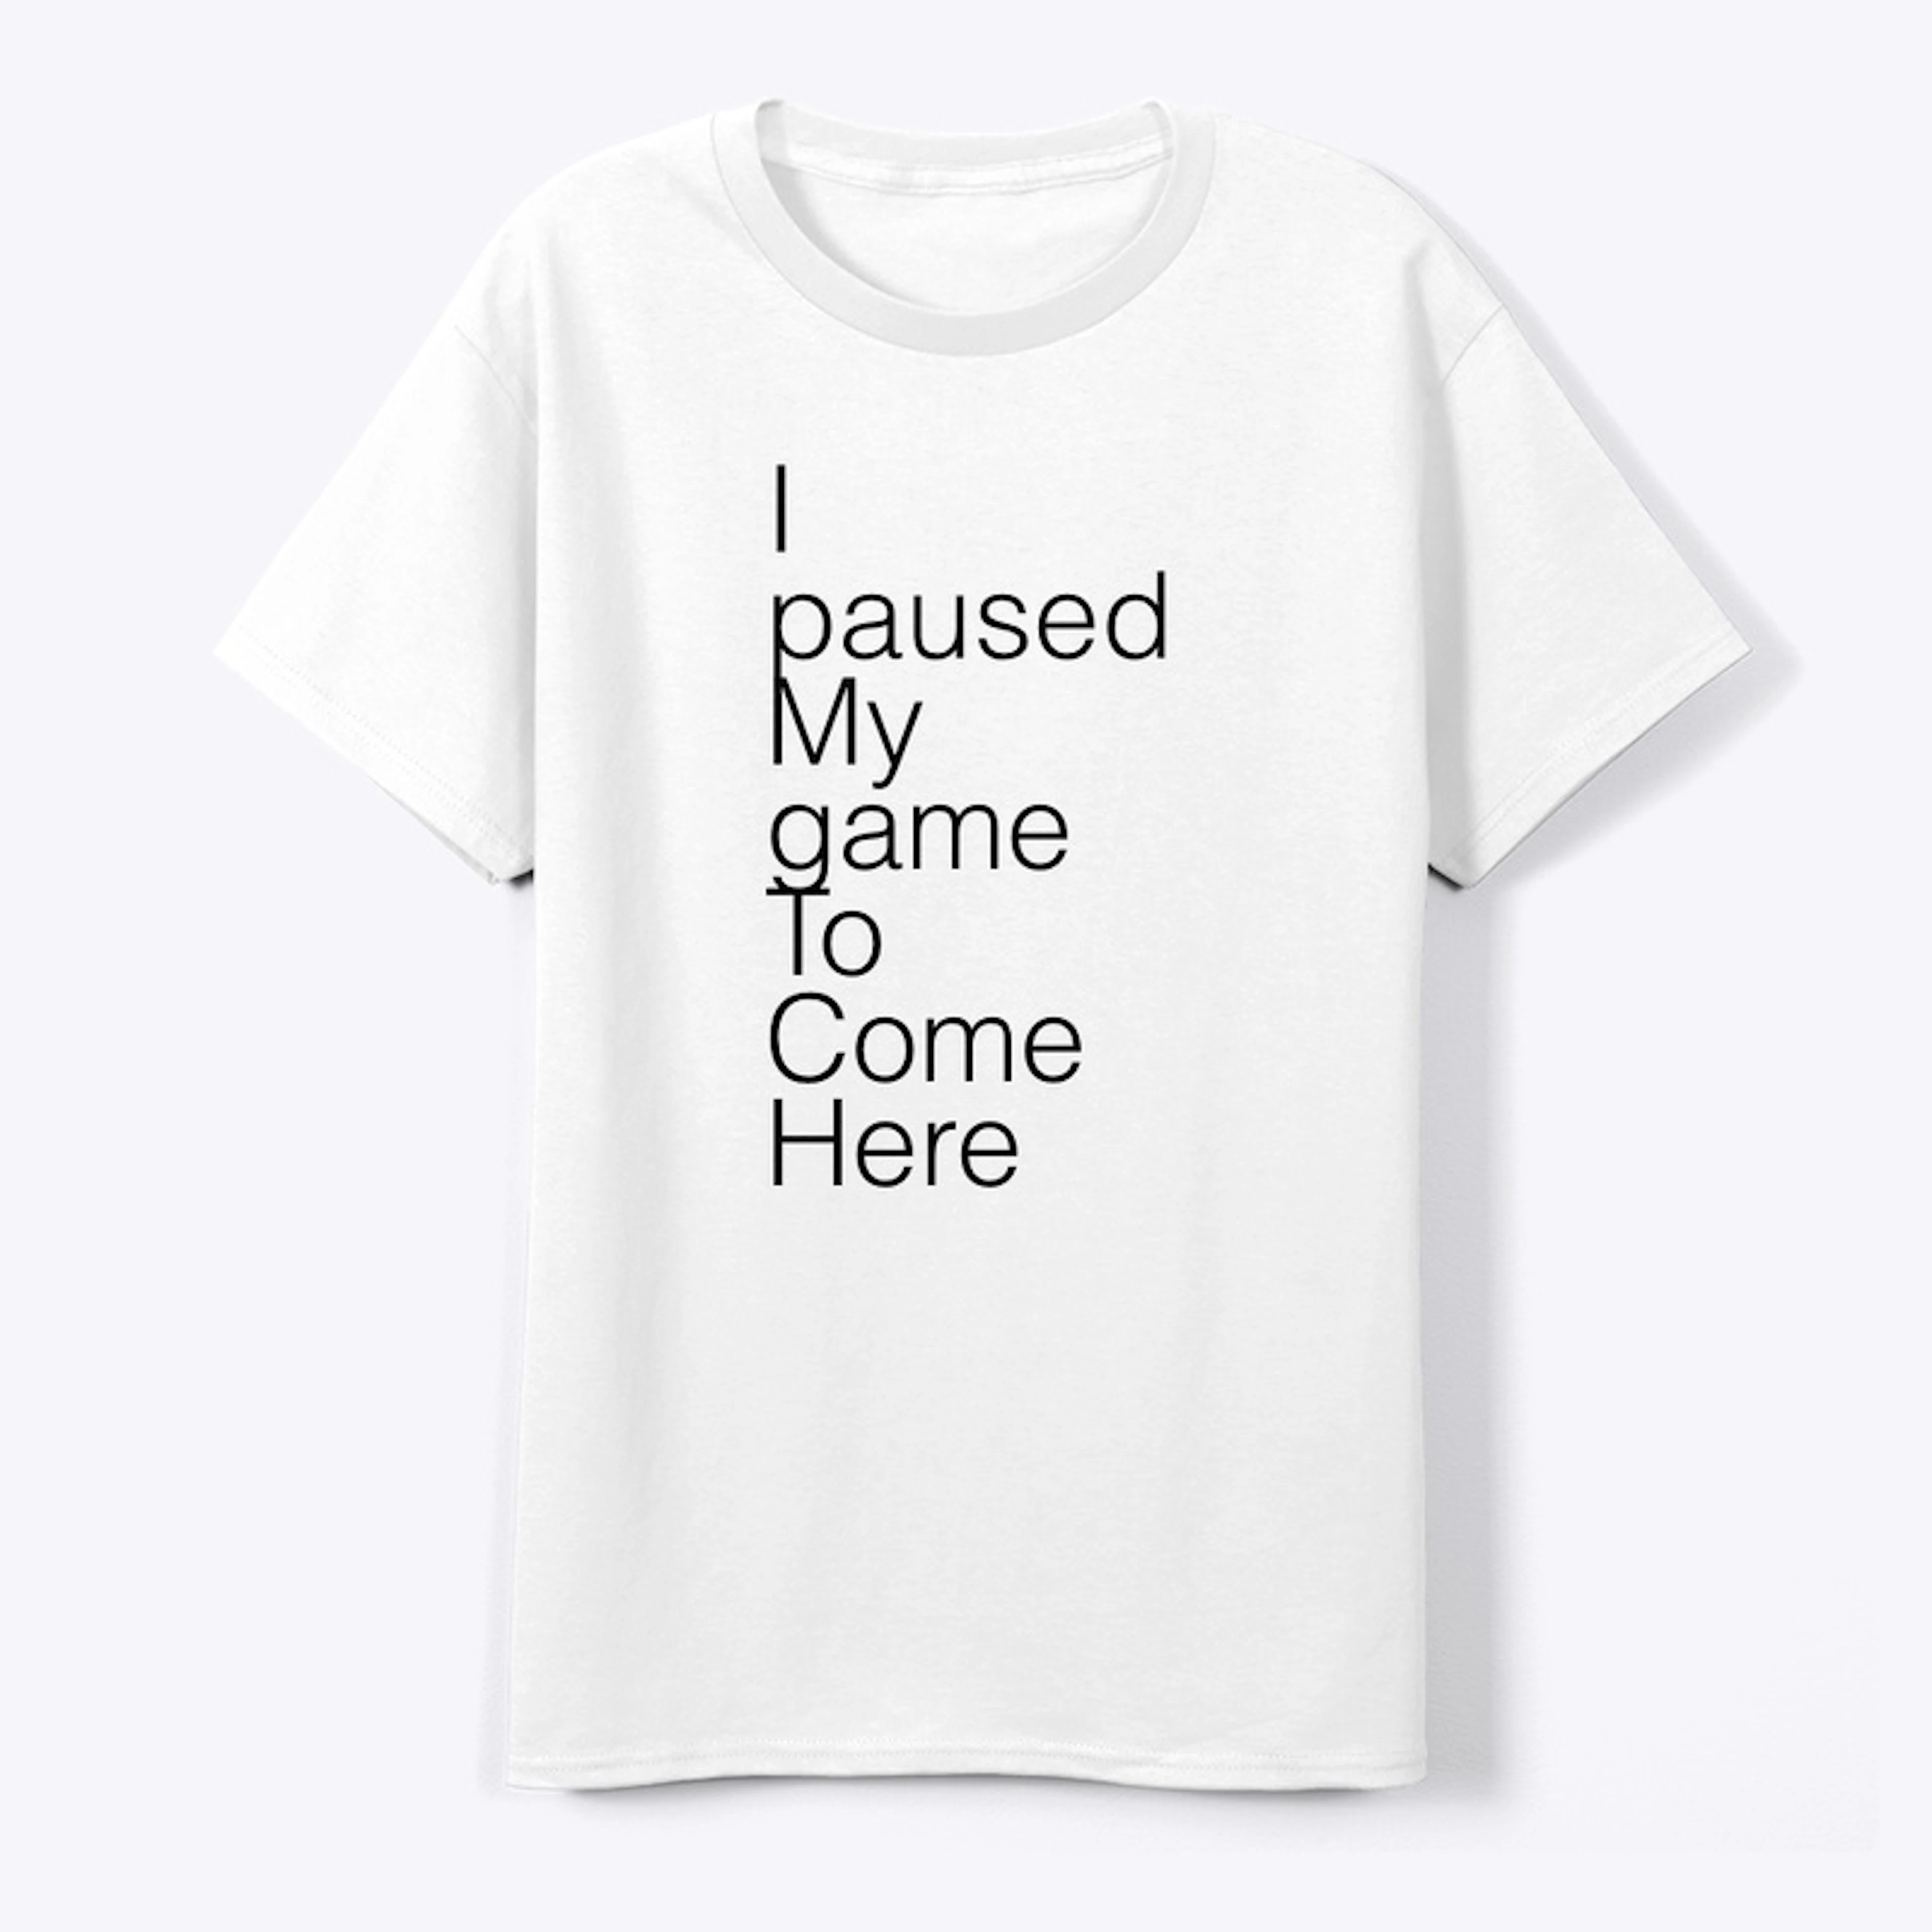 I paused my game to come here tee shirt